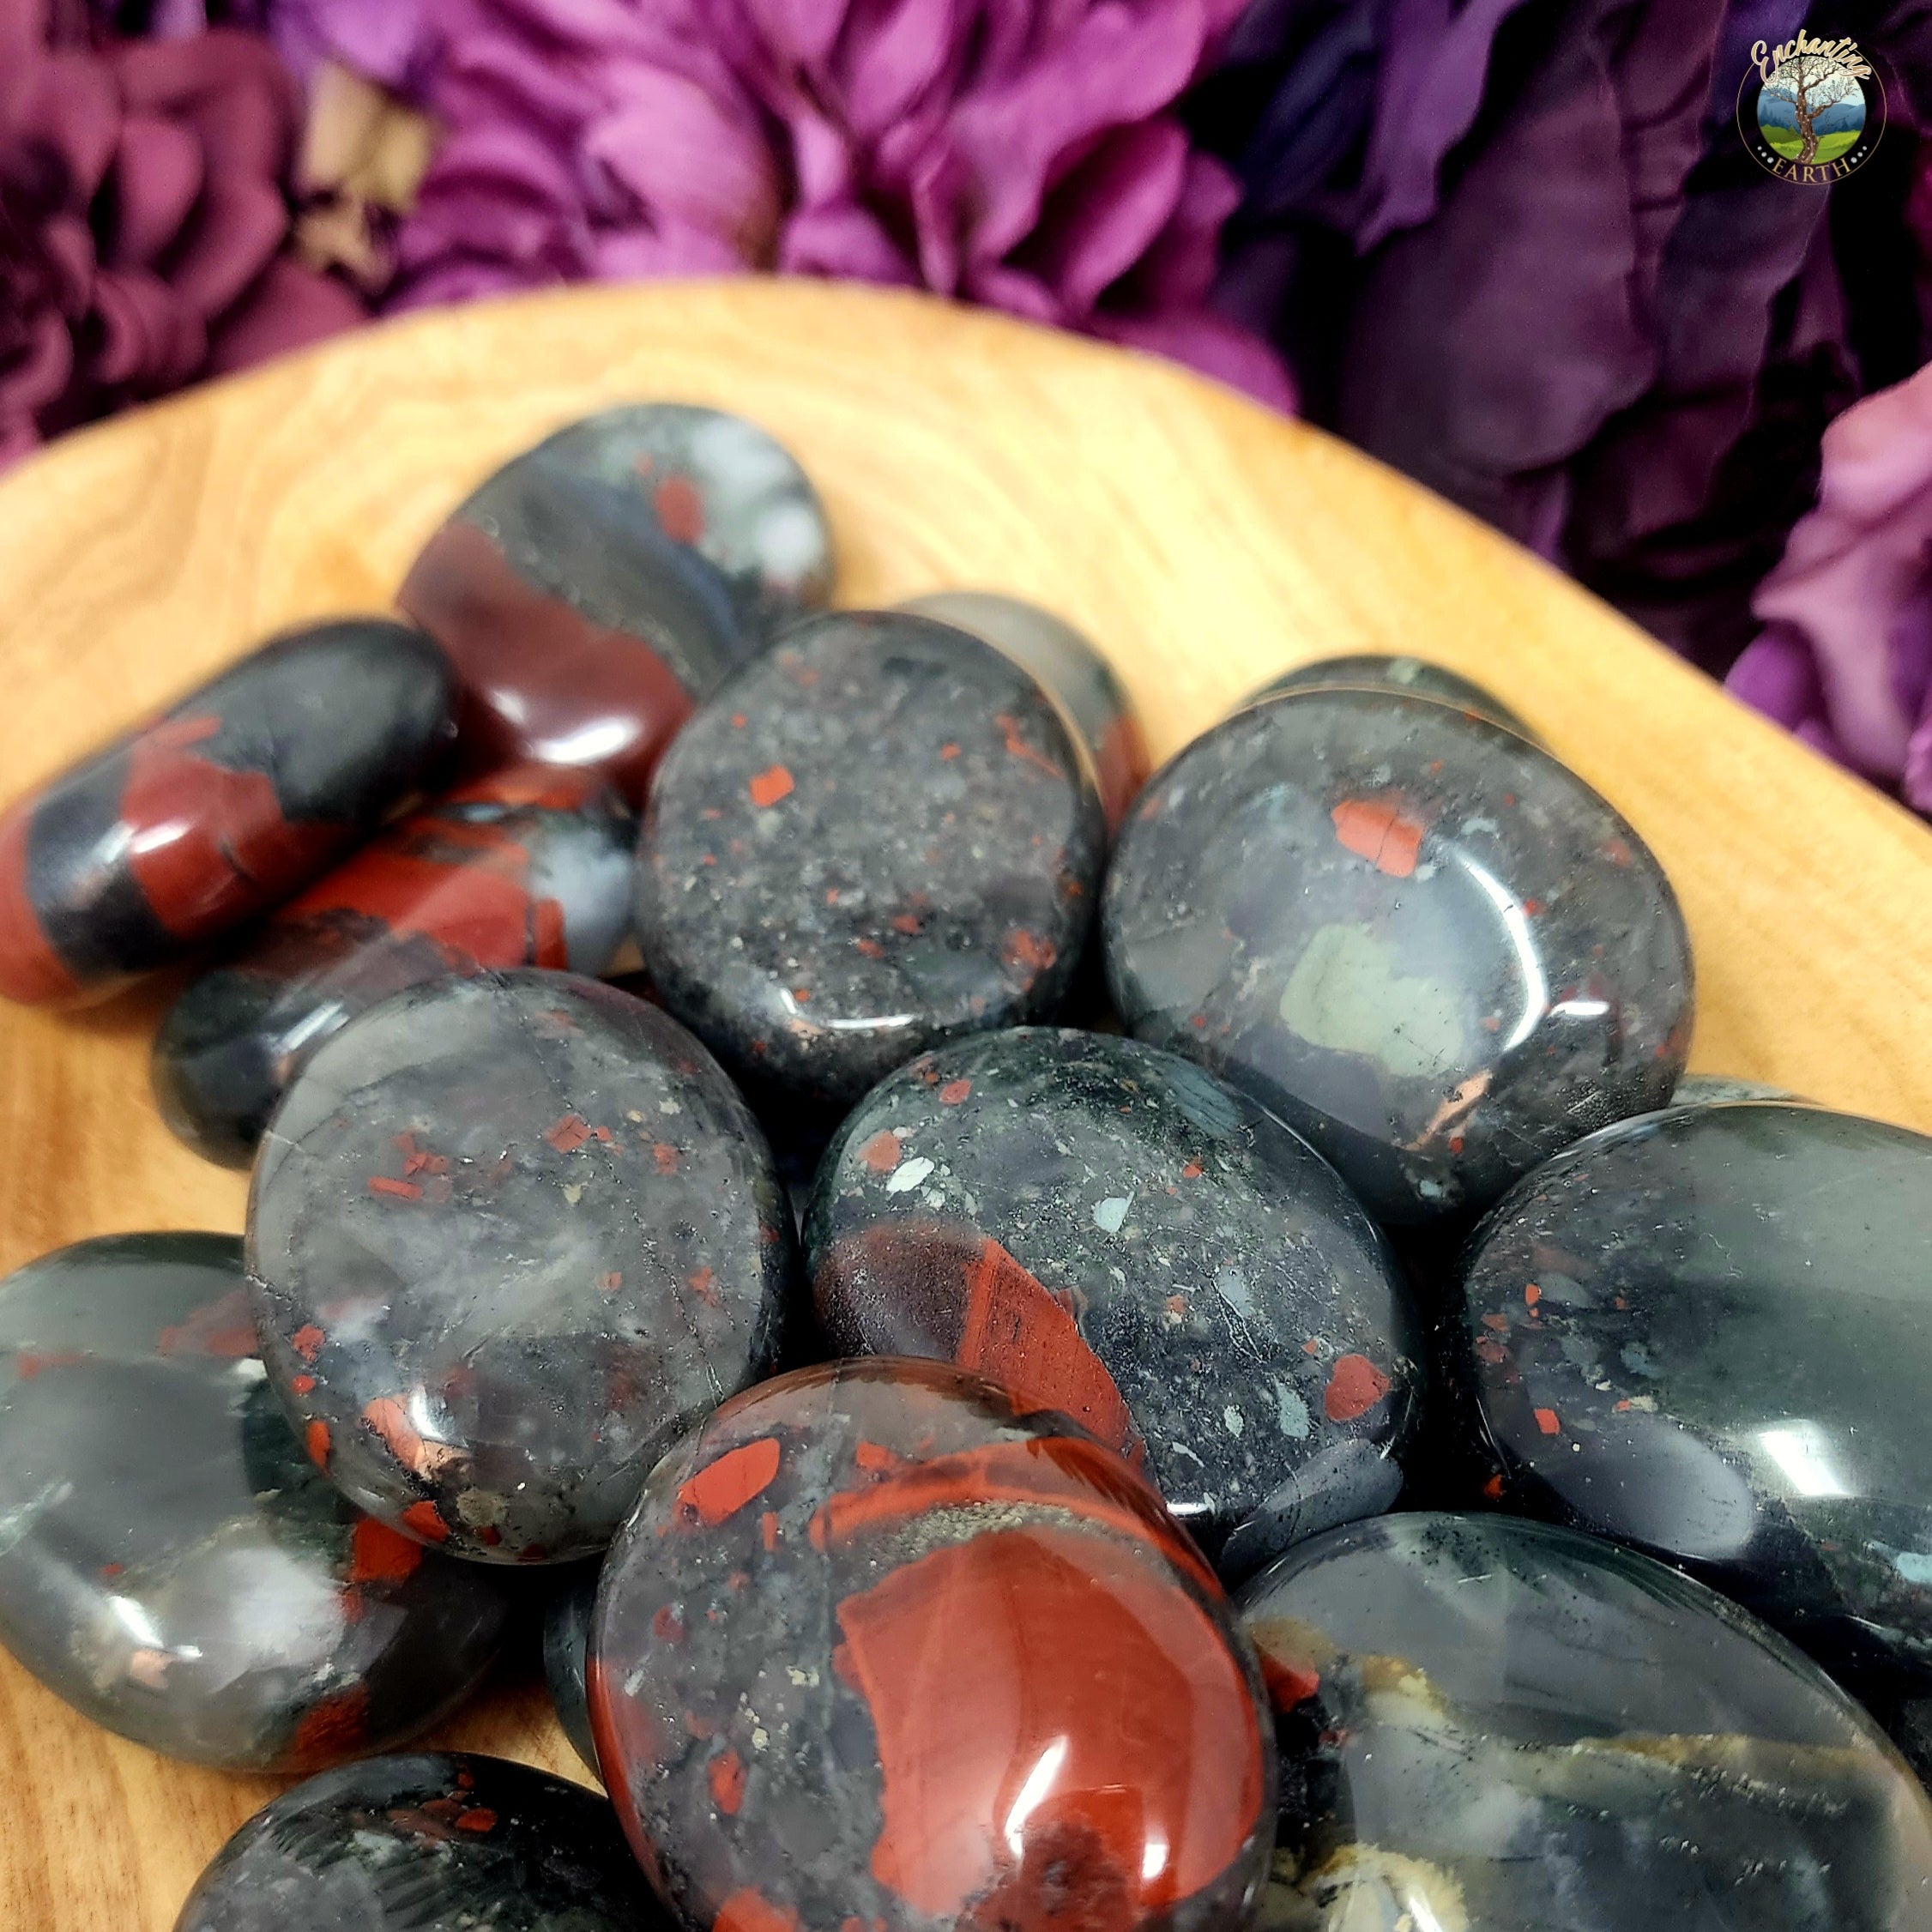 Bloodstone Palm Stone for Courage, Strength and Vitality